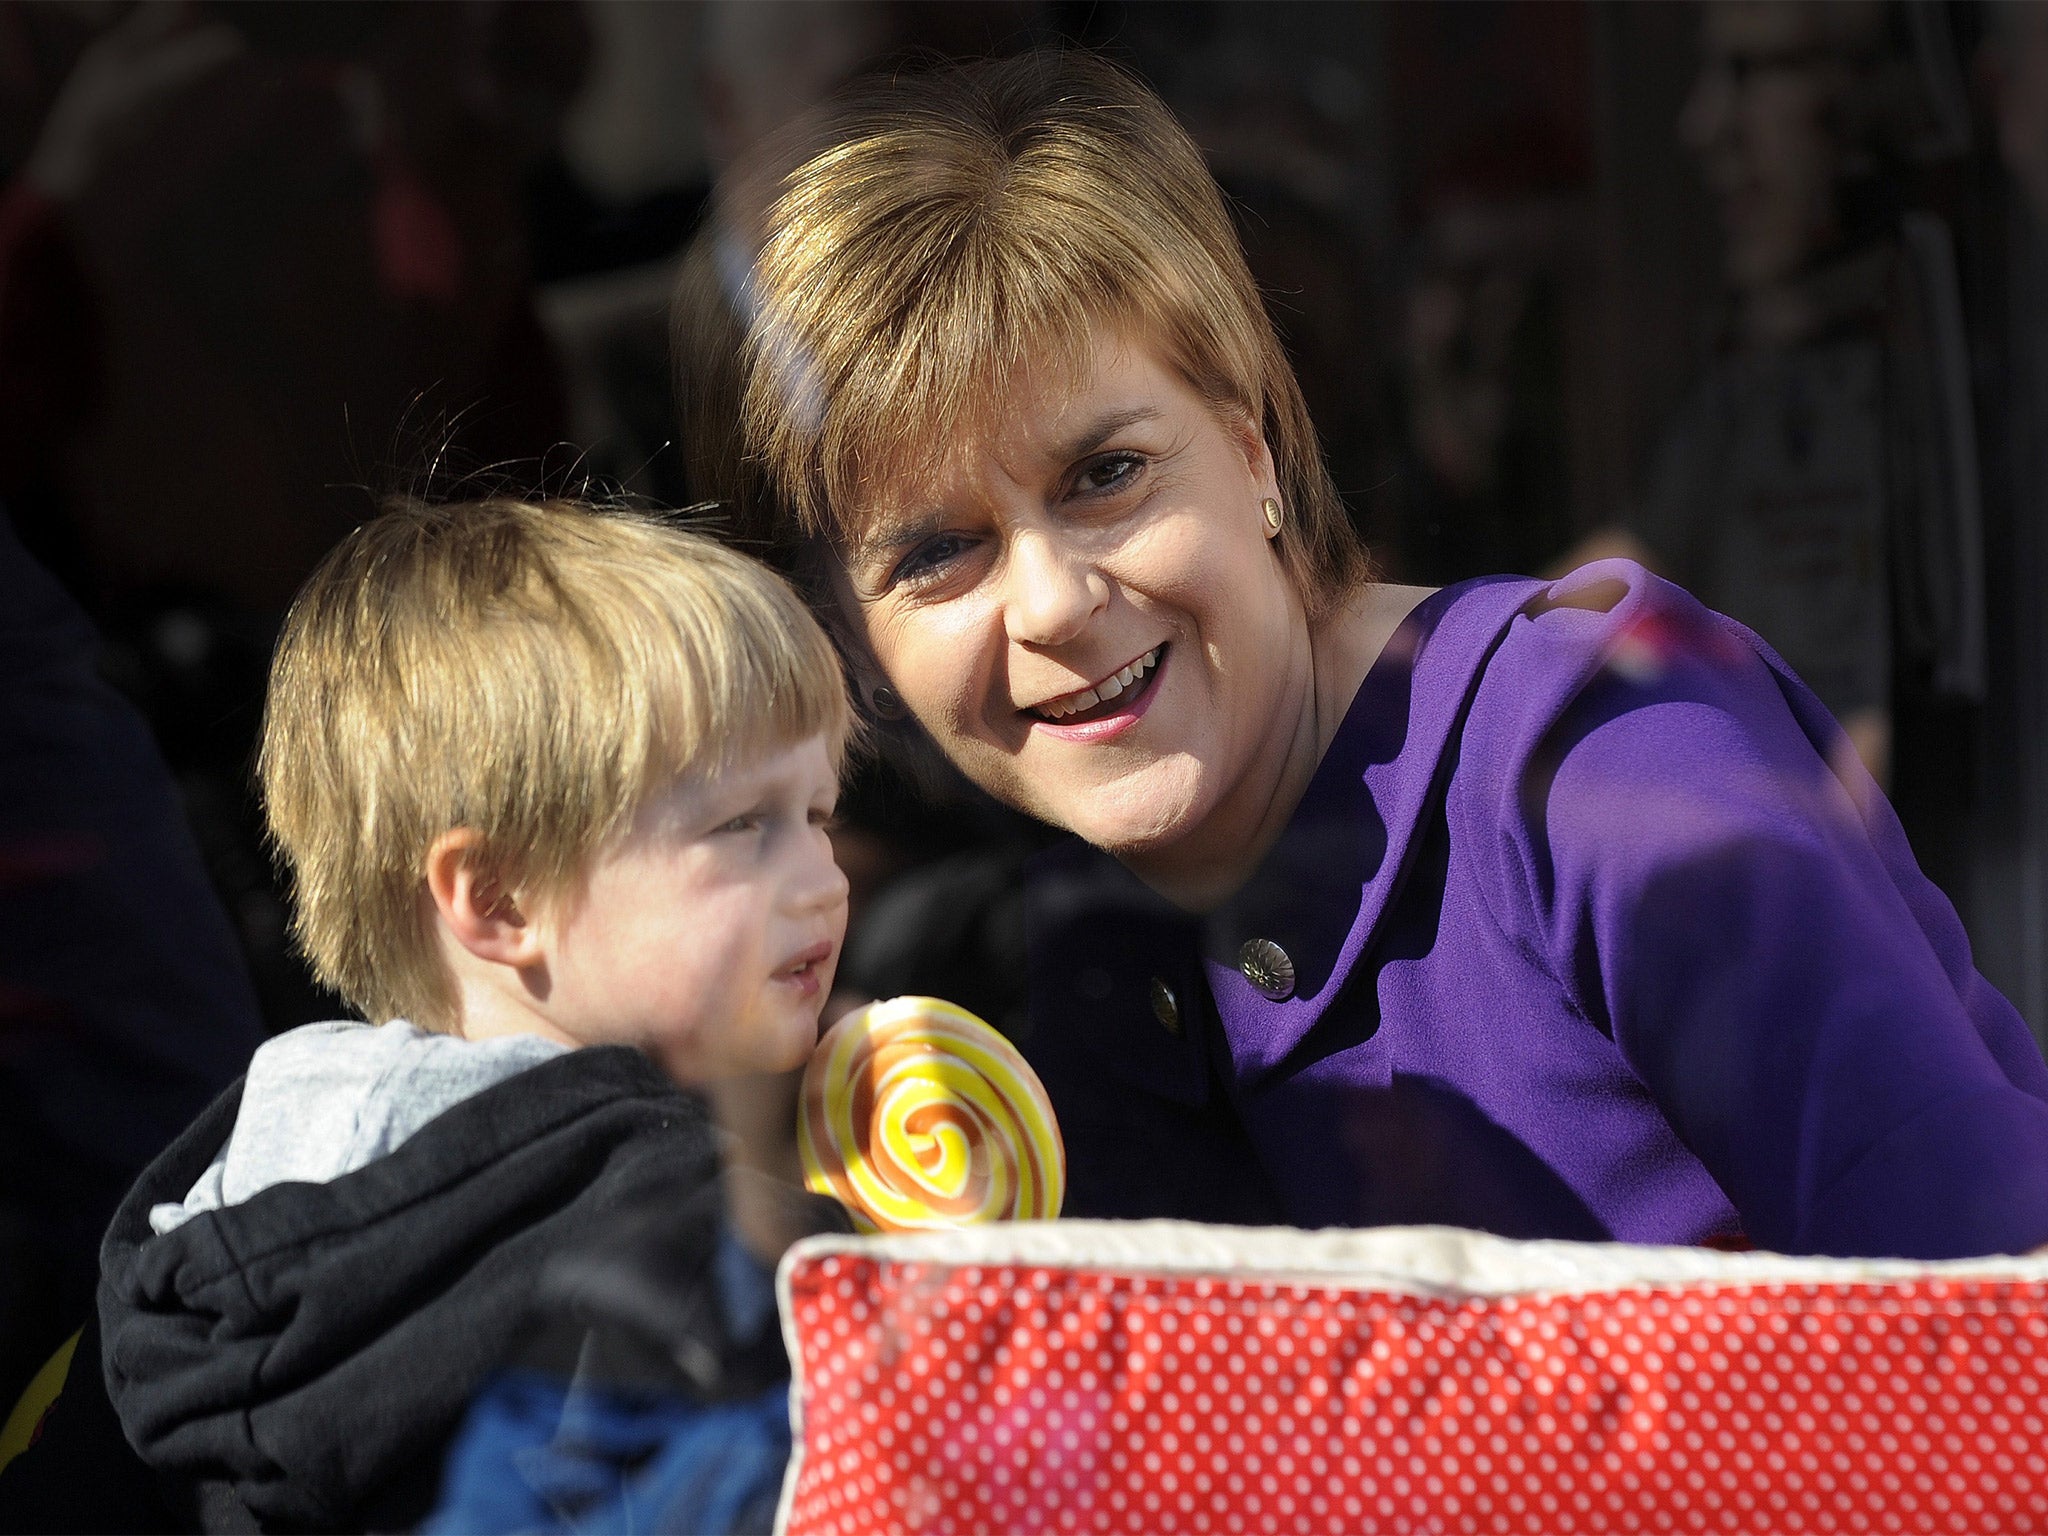 SNP leader Nicola Sturgeon campaigning in Edinburgh on Wednesday. The Tories are focusing on the threat of an SNP-Labour coalition